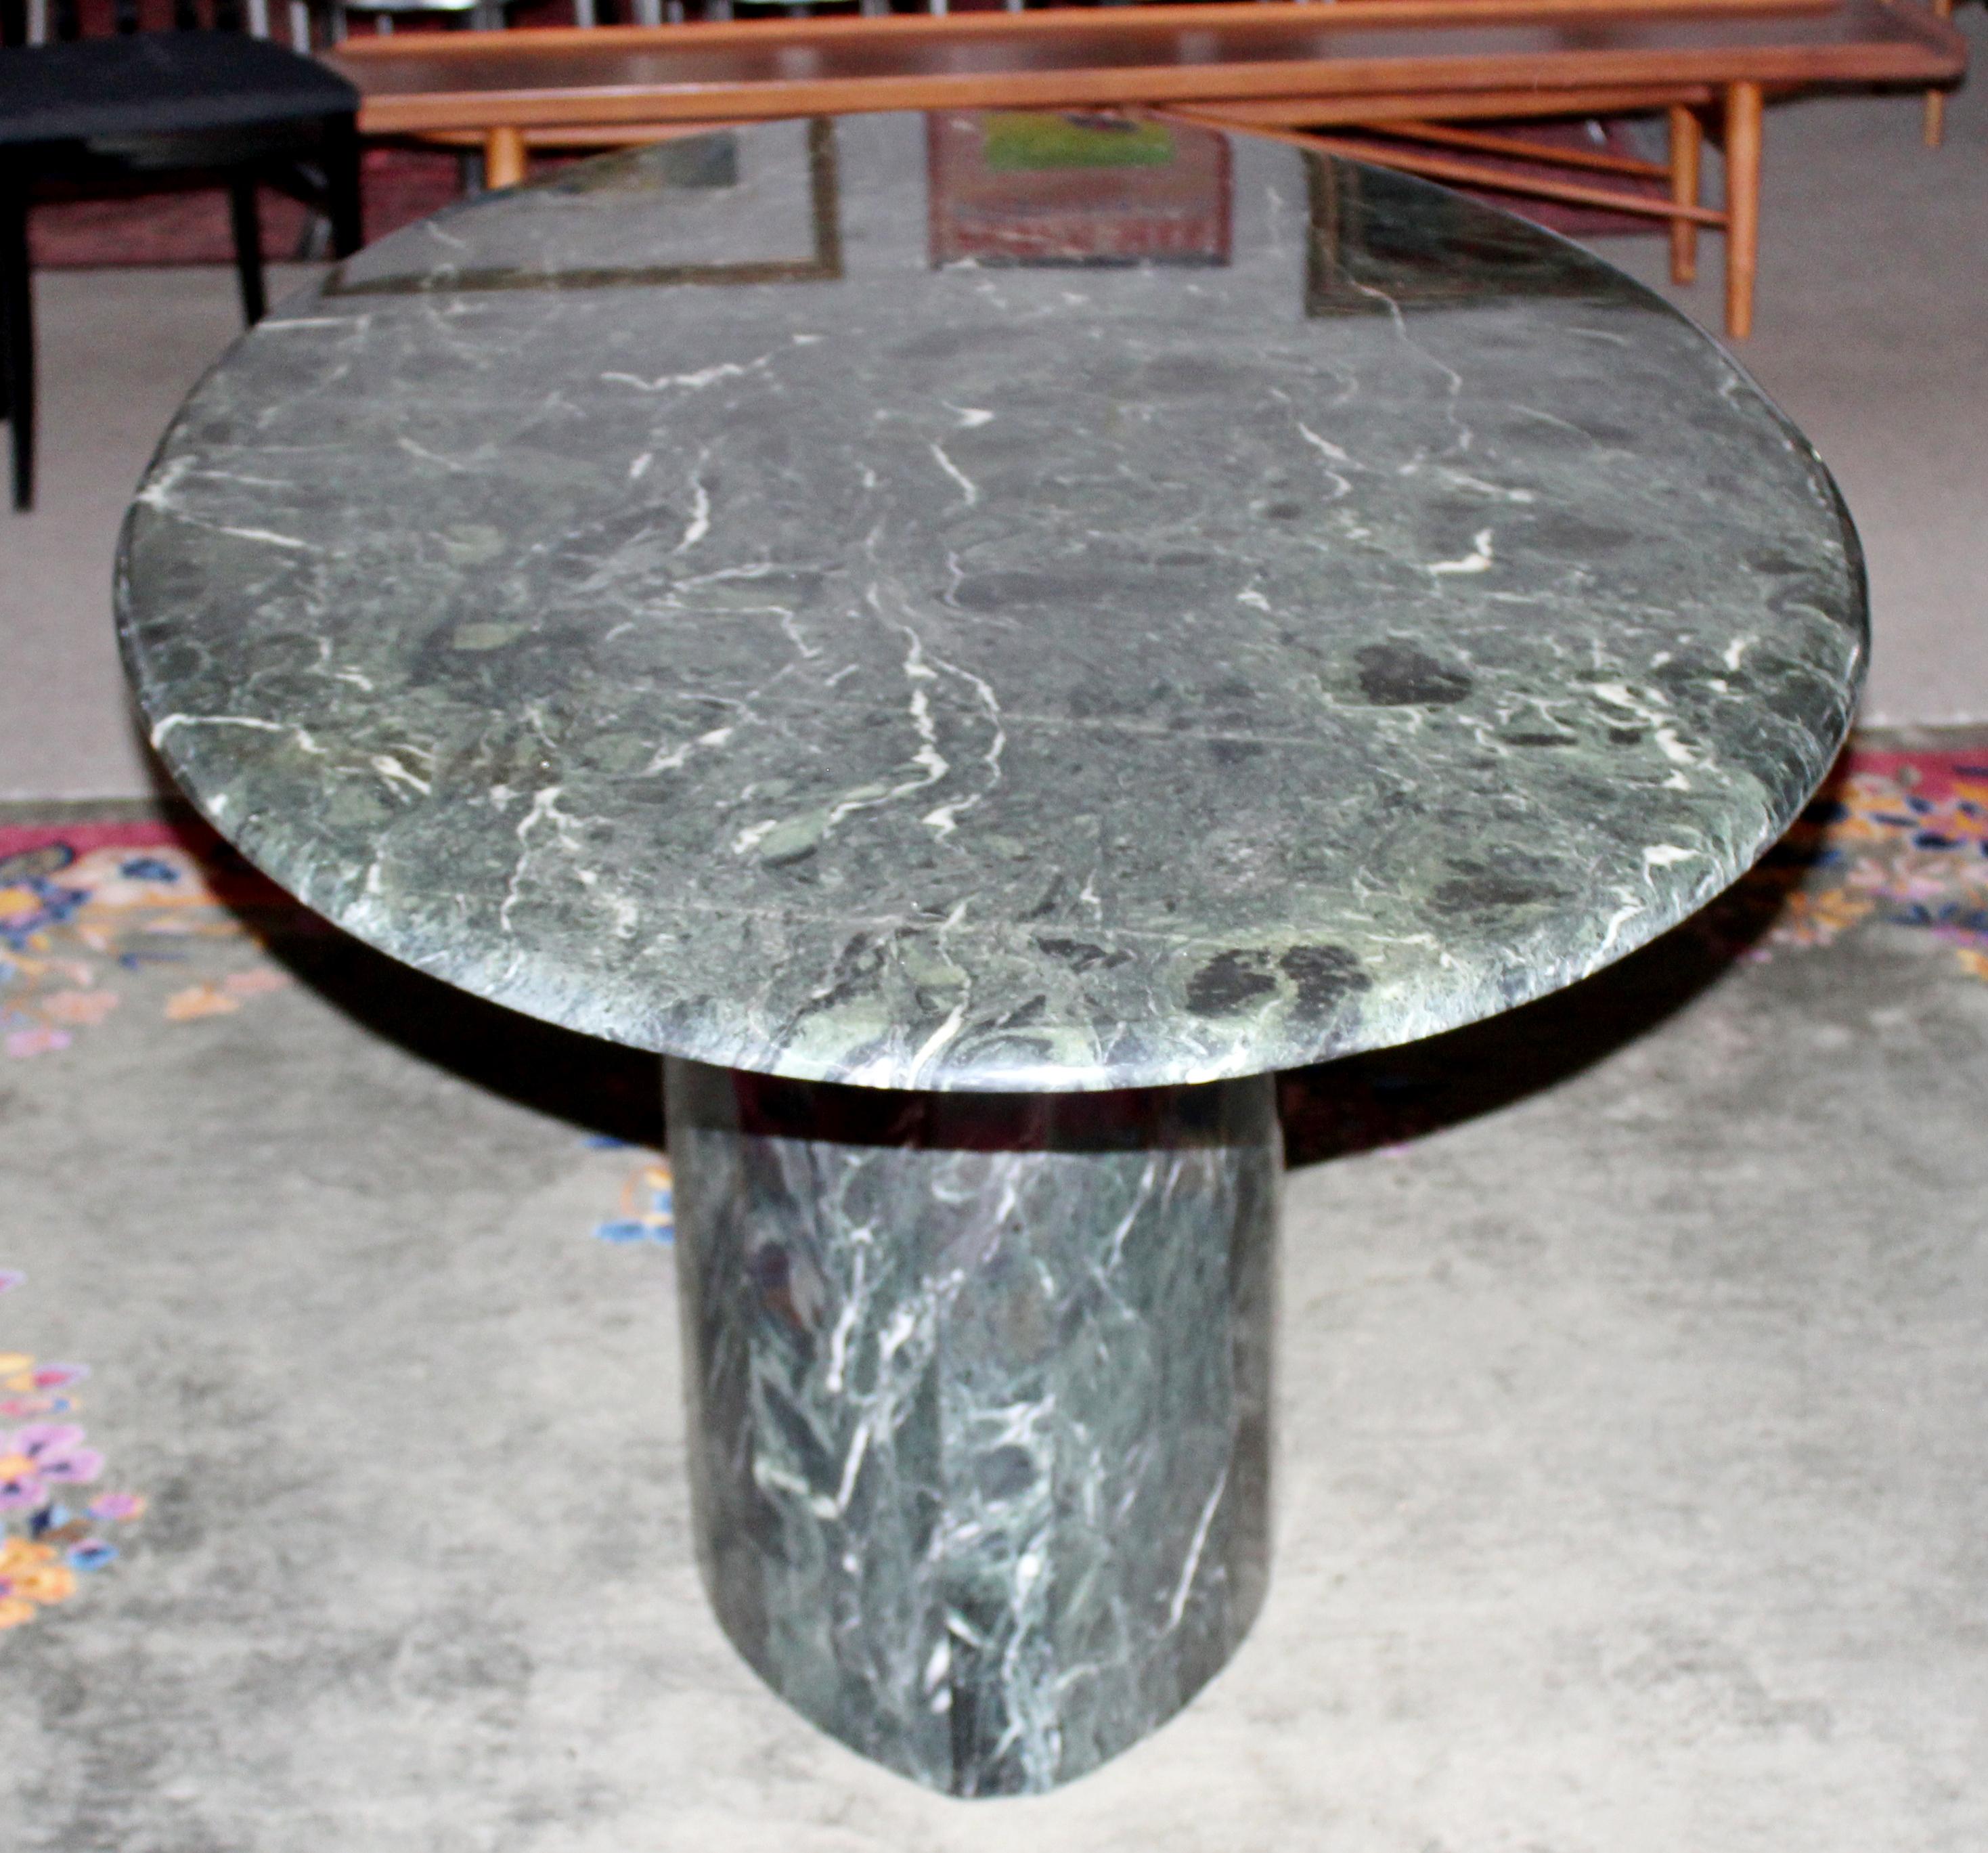 For your consideration is an absolutely incredible, oval shaped, marble dining table, made in Italy, circa 1980s. In excellent vintage condition. The dimensions are 78